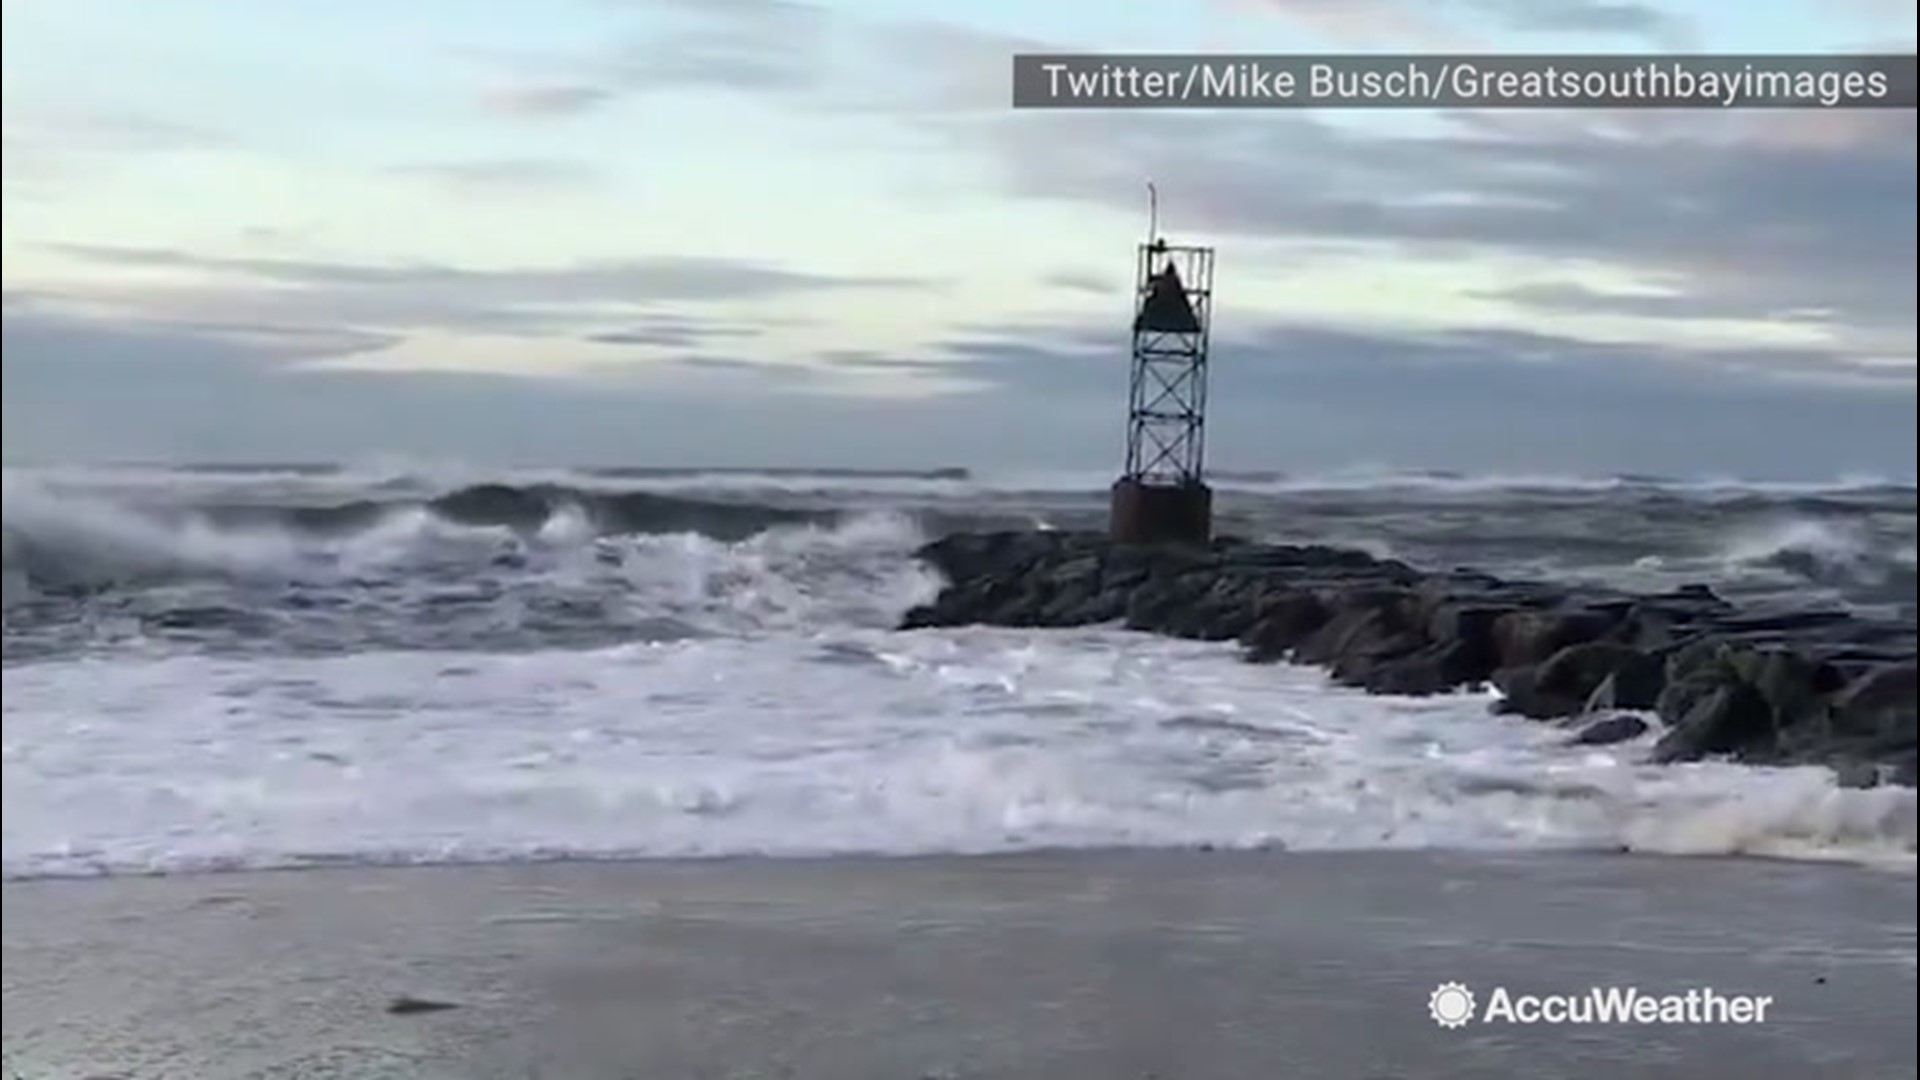 The shores of Moriches Inlet of New York's Long Island were pounded by choppy waves churned by strong winds on Oct. 10.